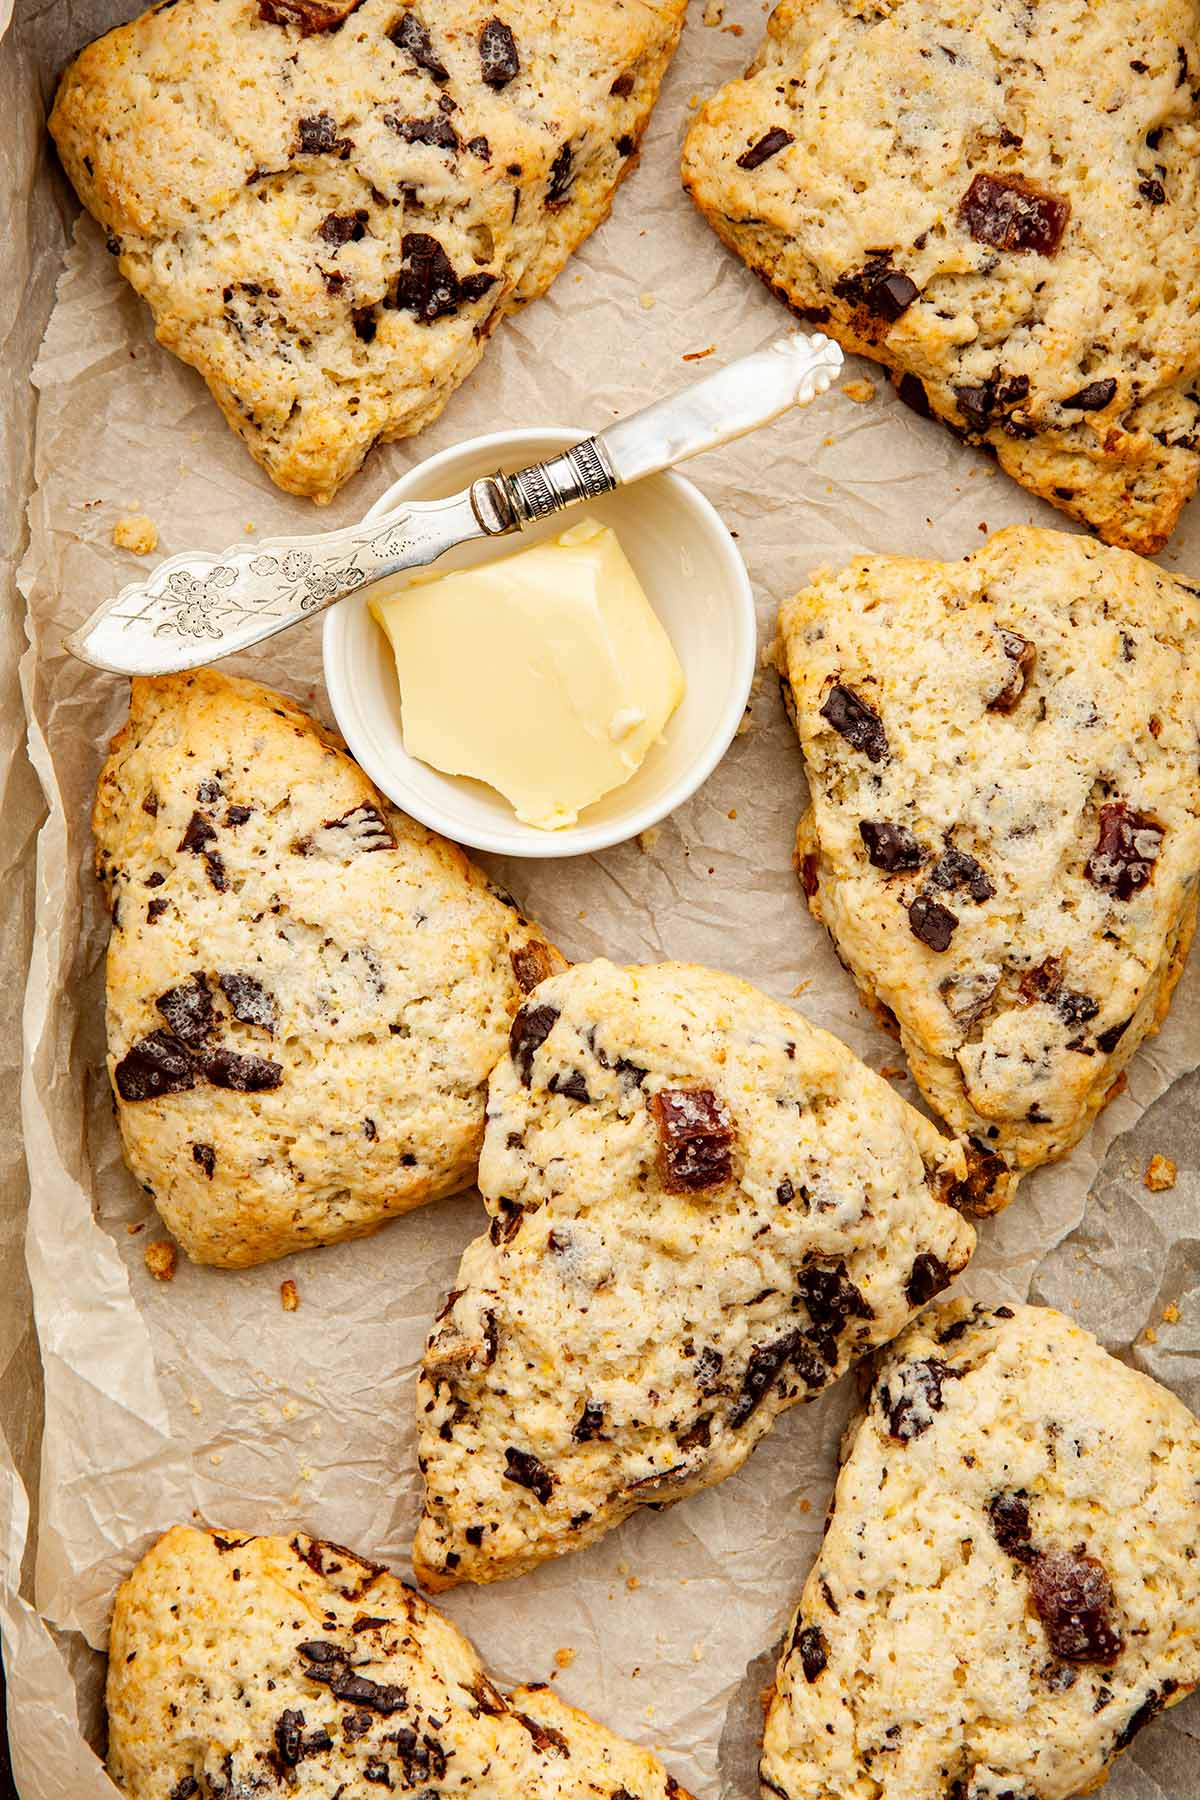 Date and orange scones piled in a box lined with parchment paper with a small dish of butter and a tiny pearl-handled knife.